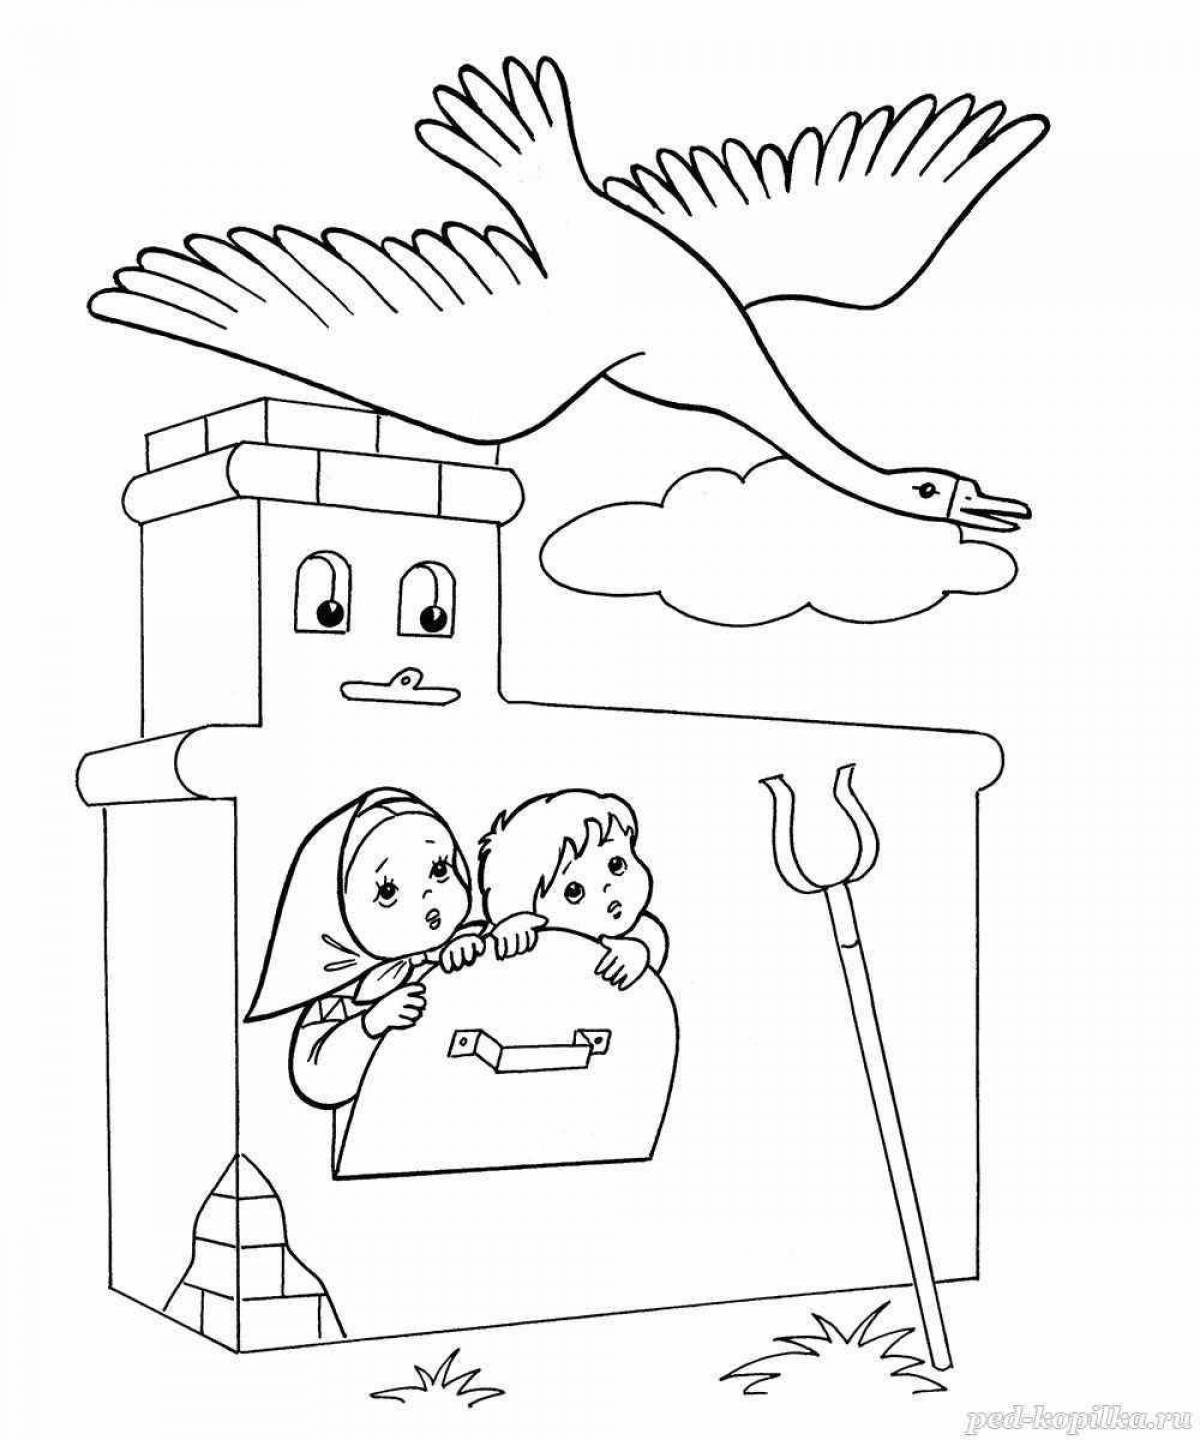 Outstanding swan geese coloring book for toddlers